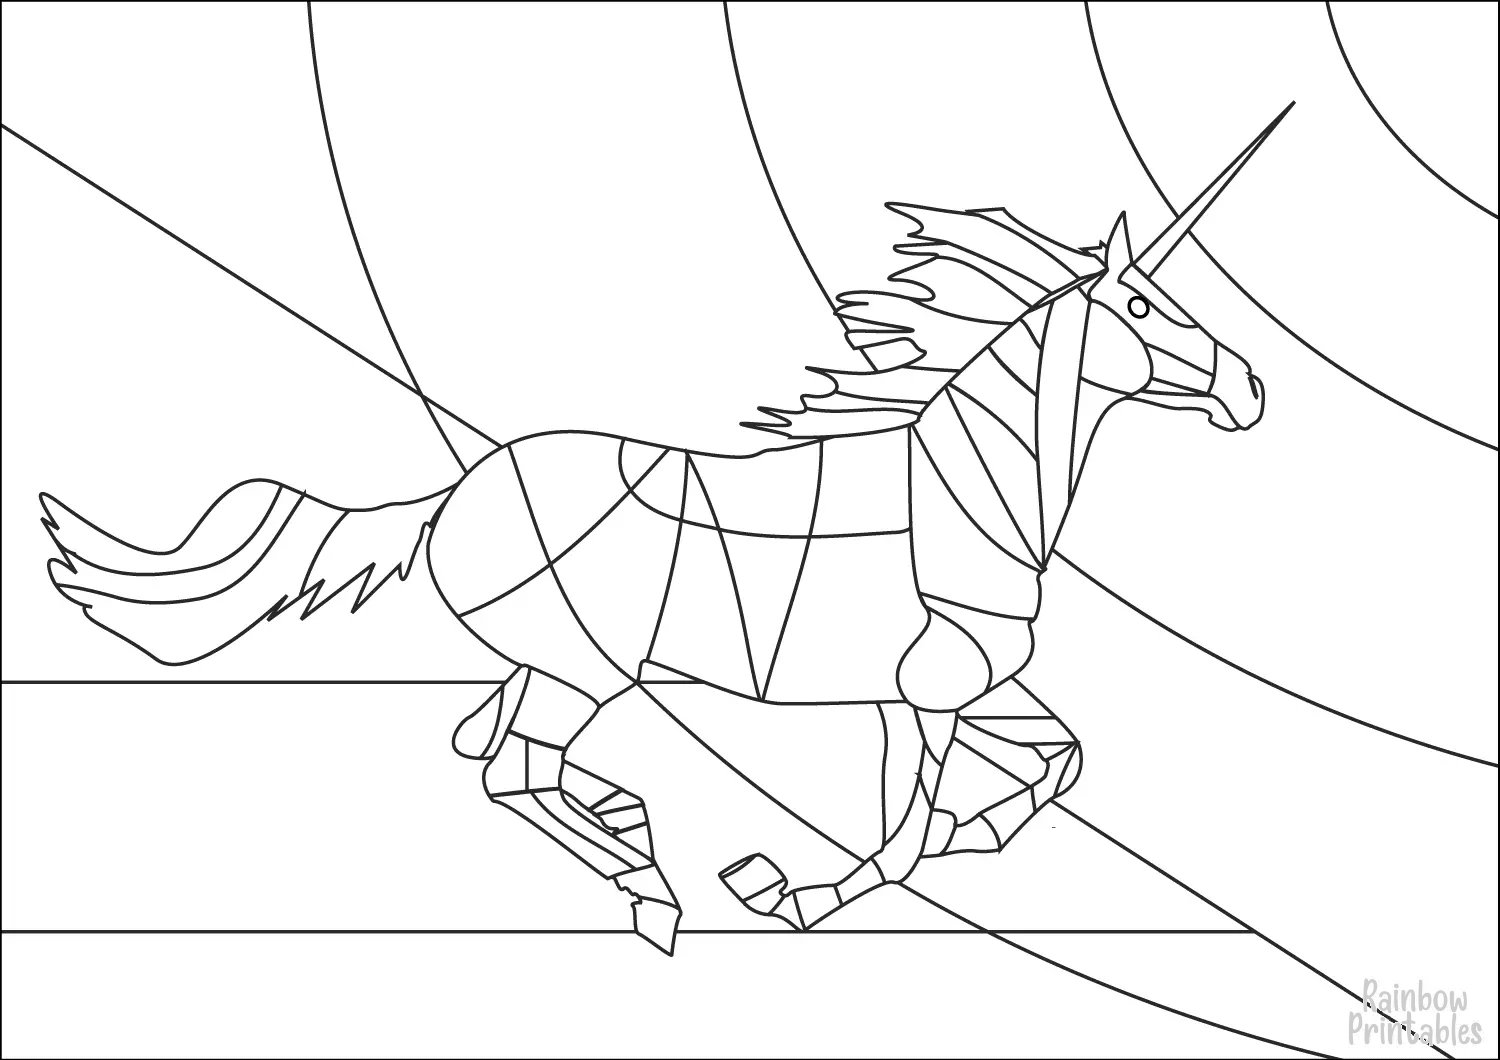 UNICORN STAINED GLASS Coloring Pages for Kids Adults Art Activities Line Art